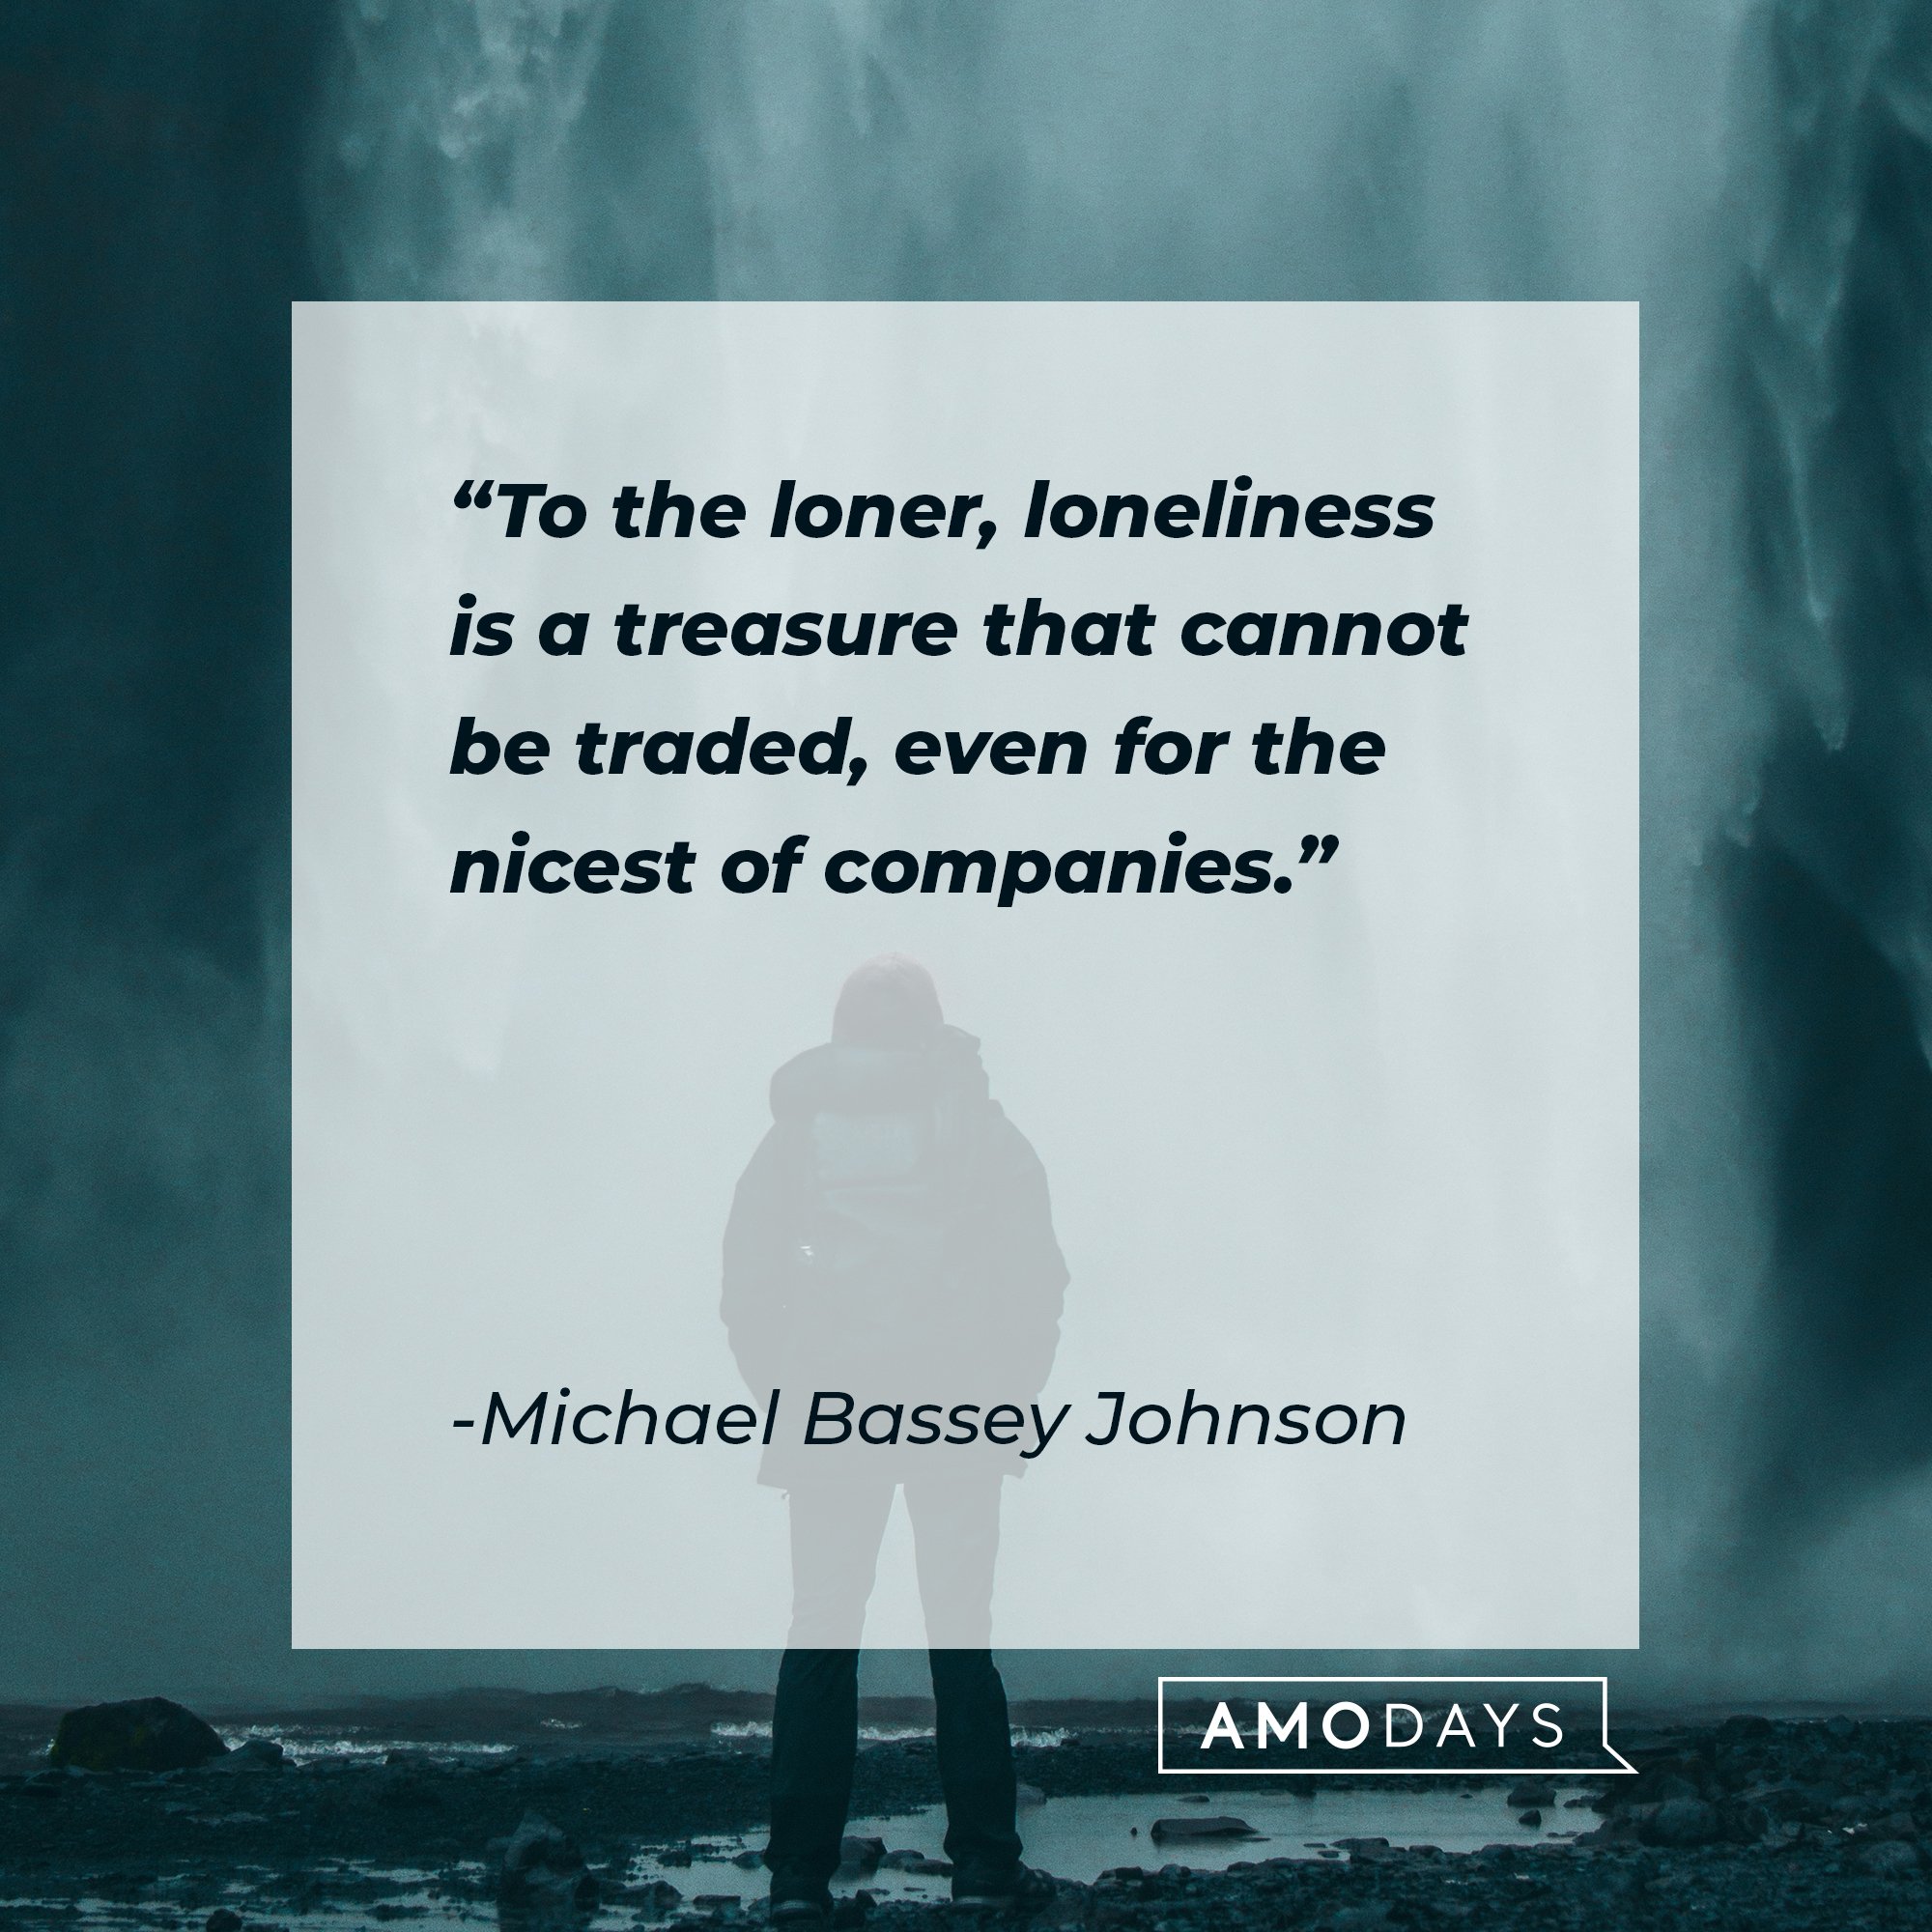 Michael Bassey Johnson’s quote: "To the loner, loneliness is a treasure that cannot be traded, even for the nicest of companies." | Image: AmoDays